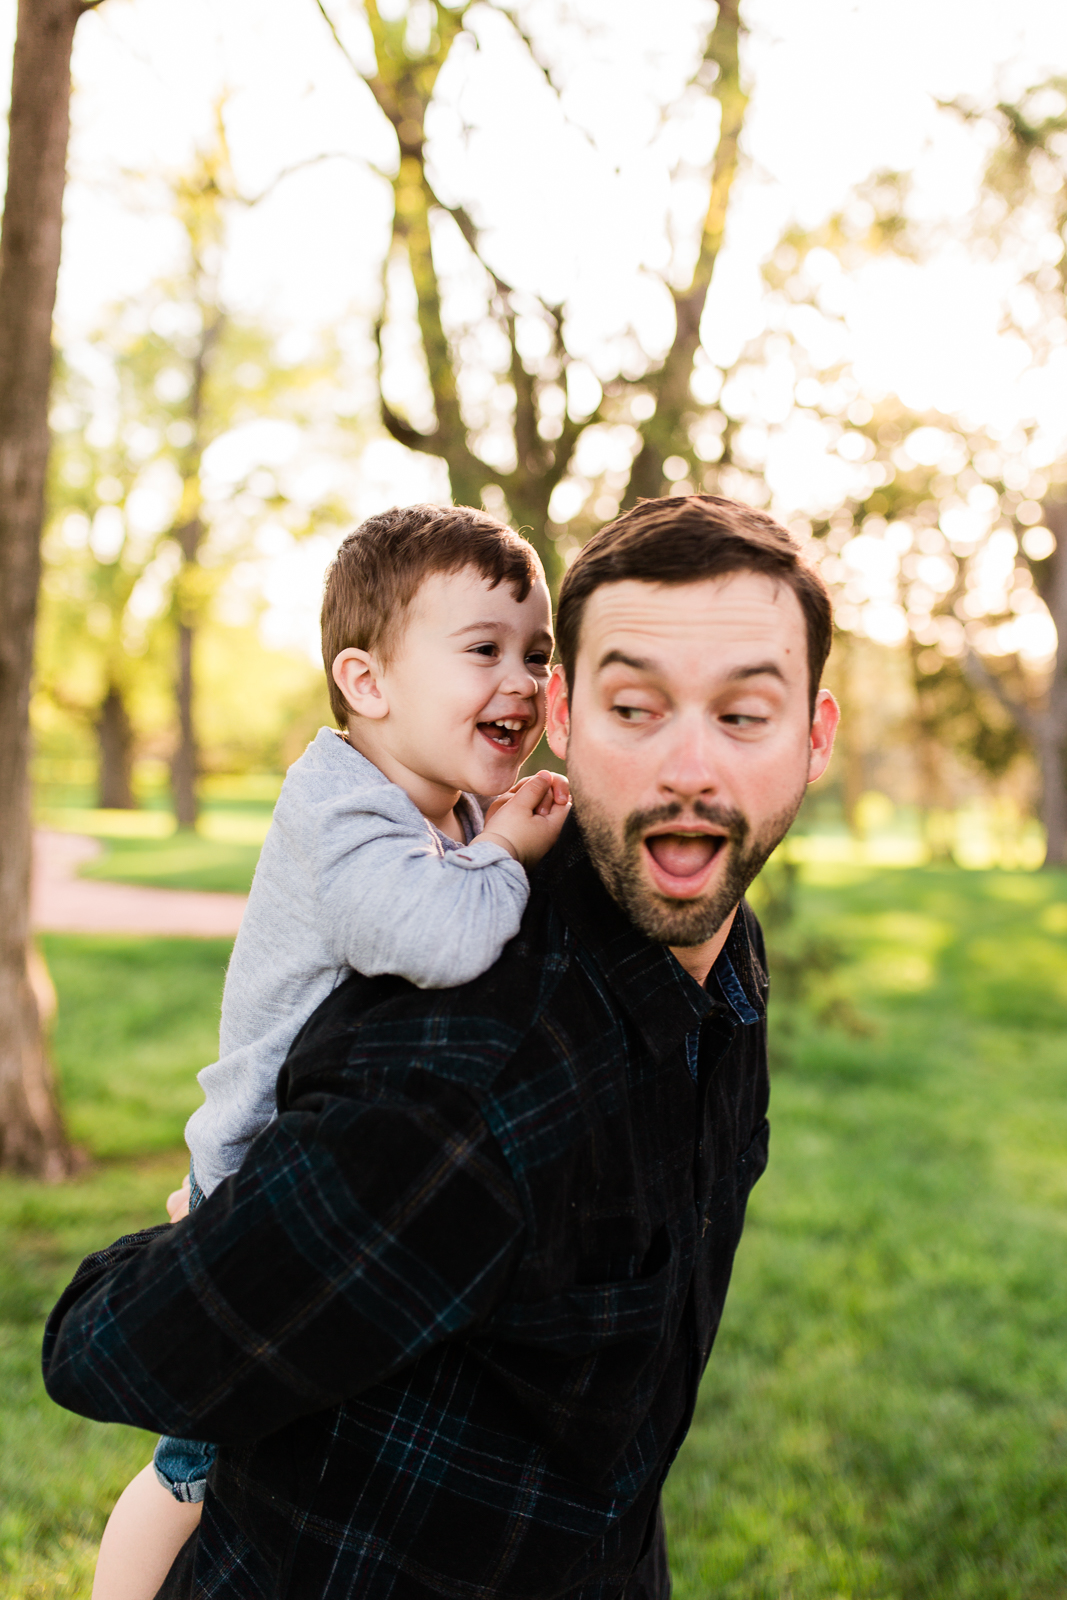  Father gives his son a piggyback ride in the park, Kansas City lifestyle photographer, Rebecca Clair Photography 